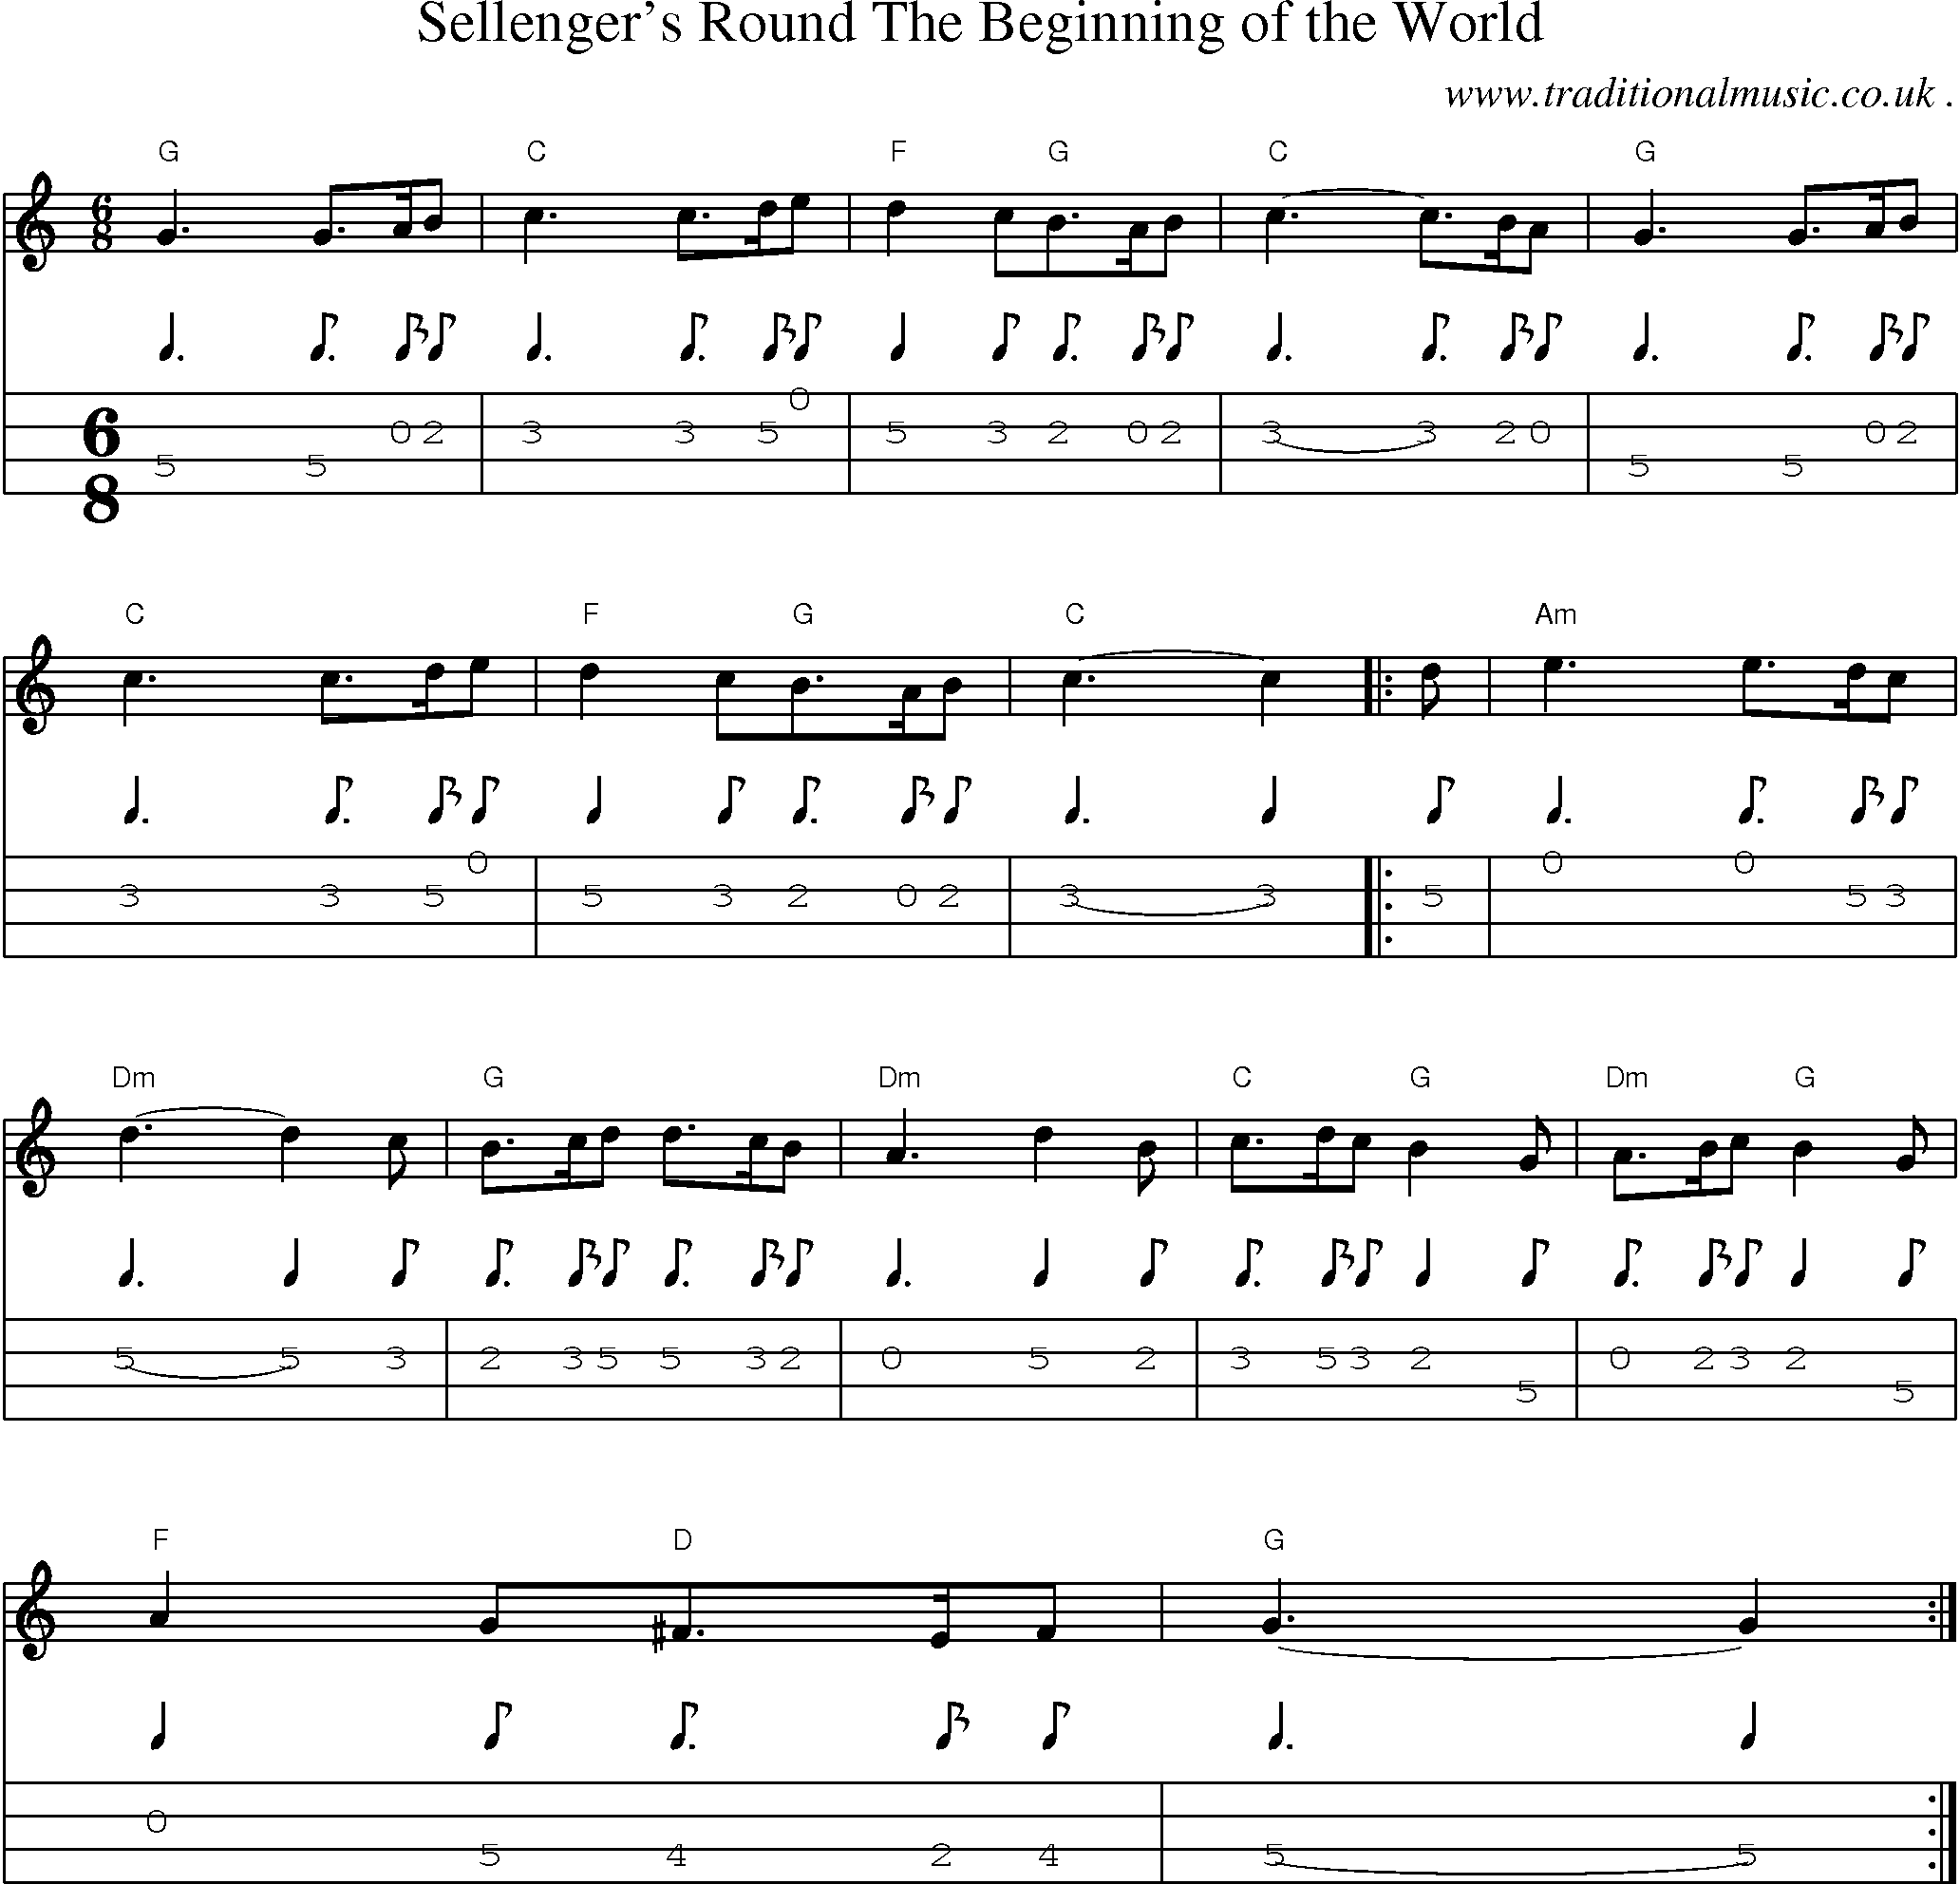 Sheet-Music and Mandolin Tabs for Sellengers Round The Beginning Of The World